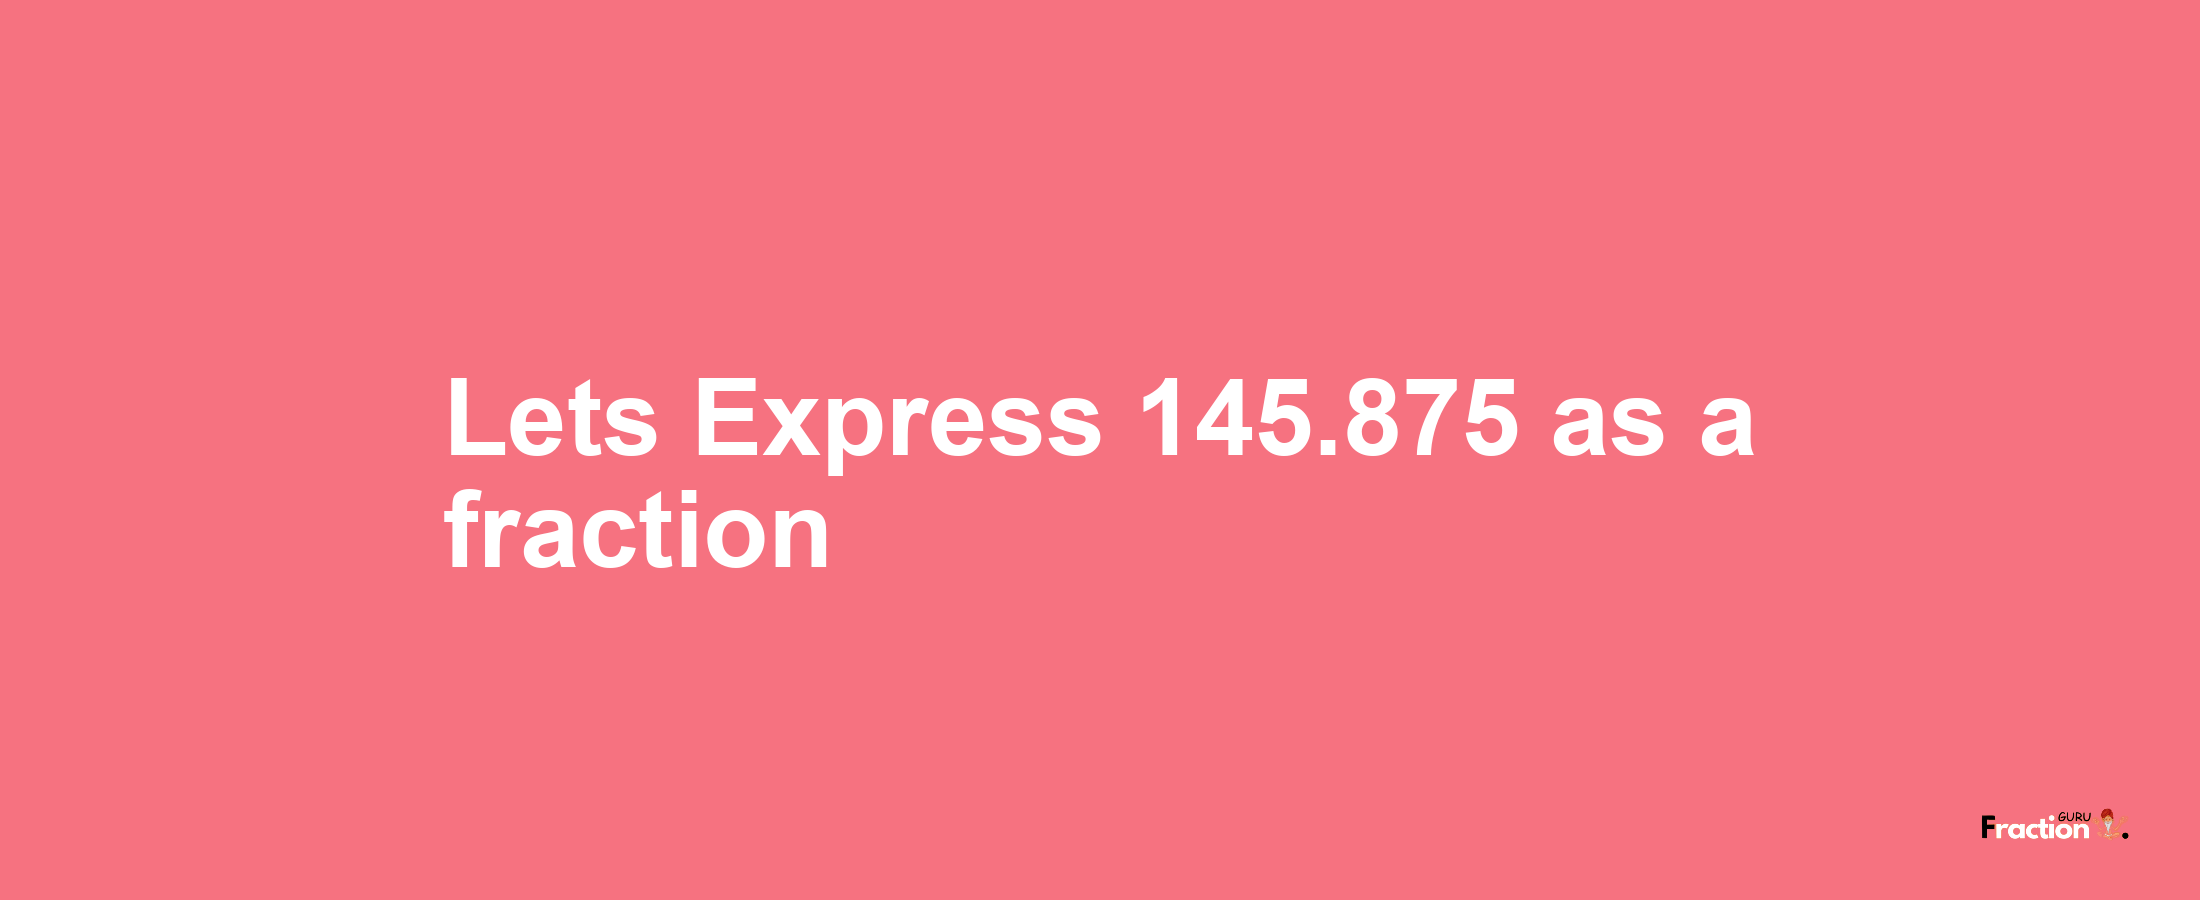 Lets Express 145.875 as afraction